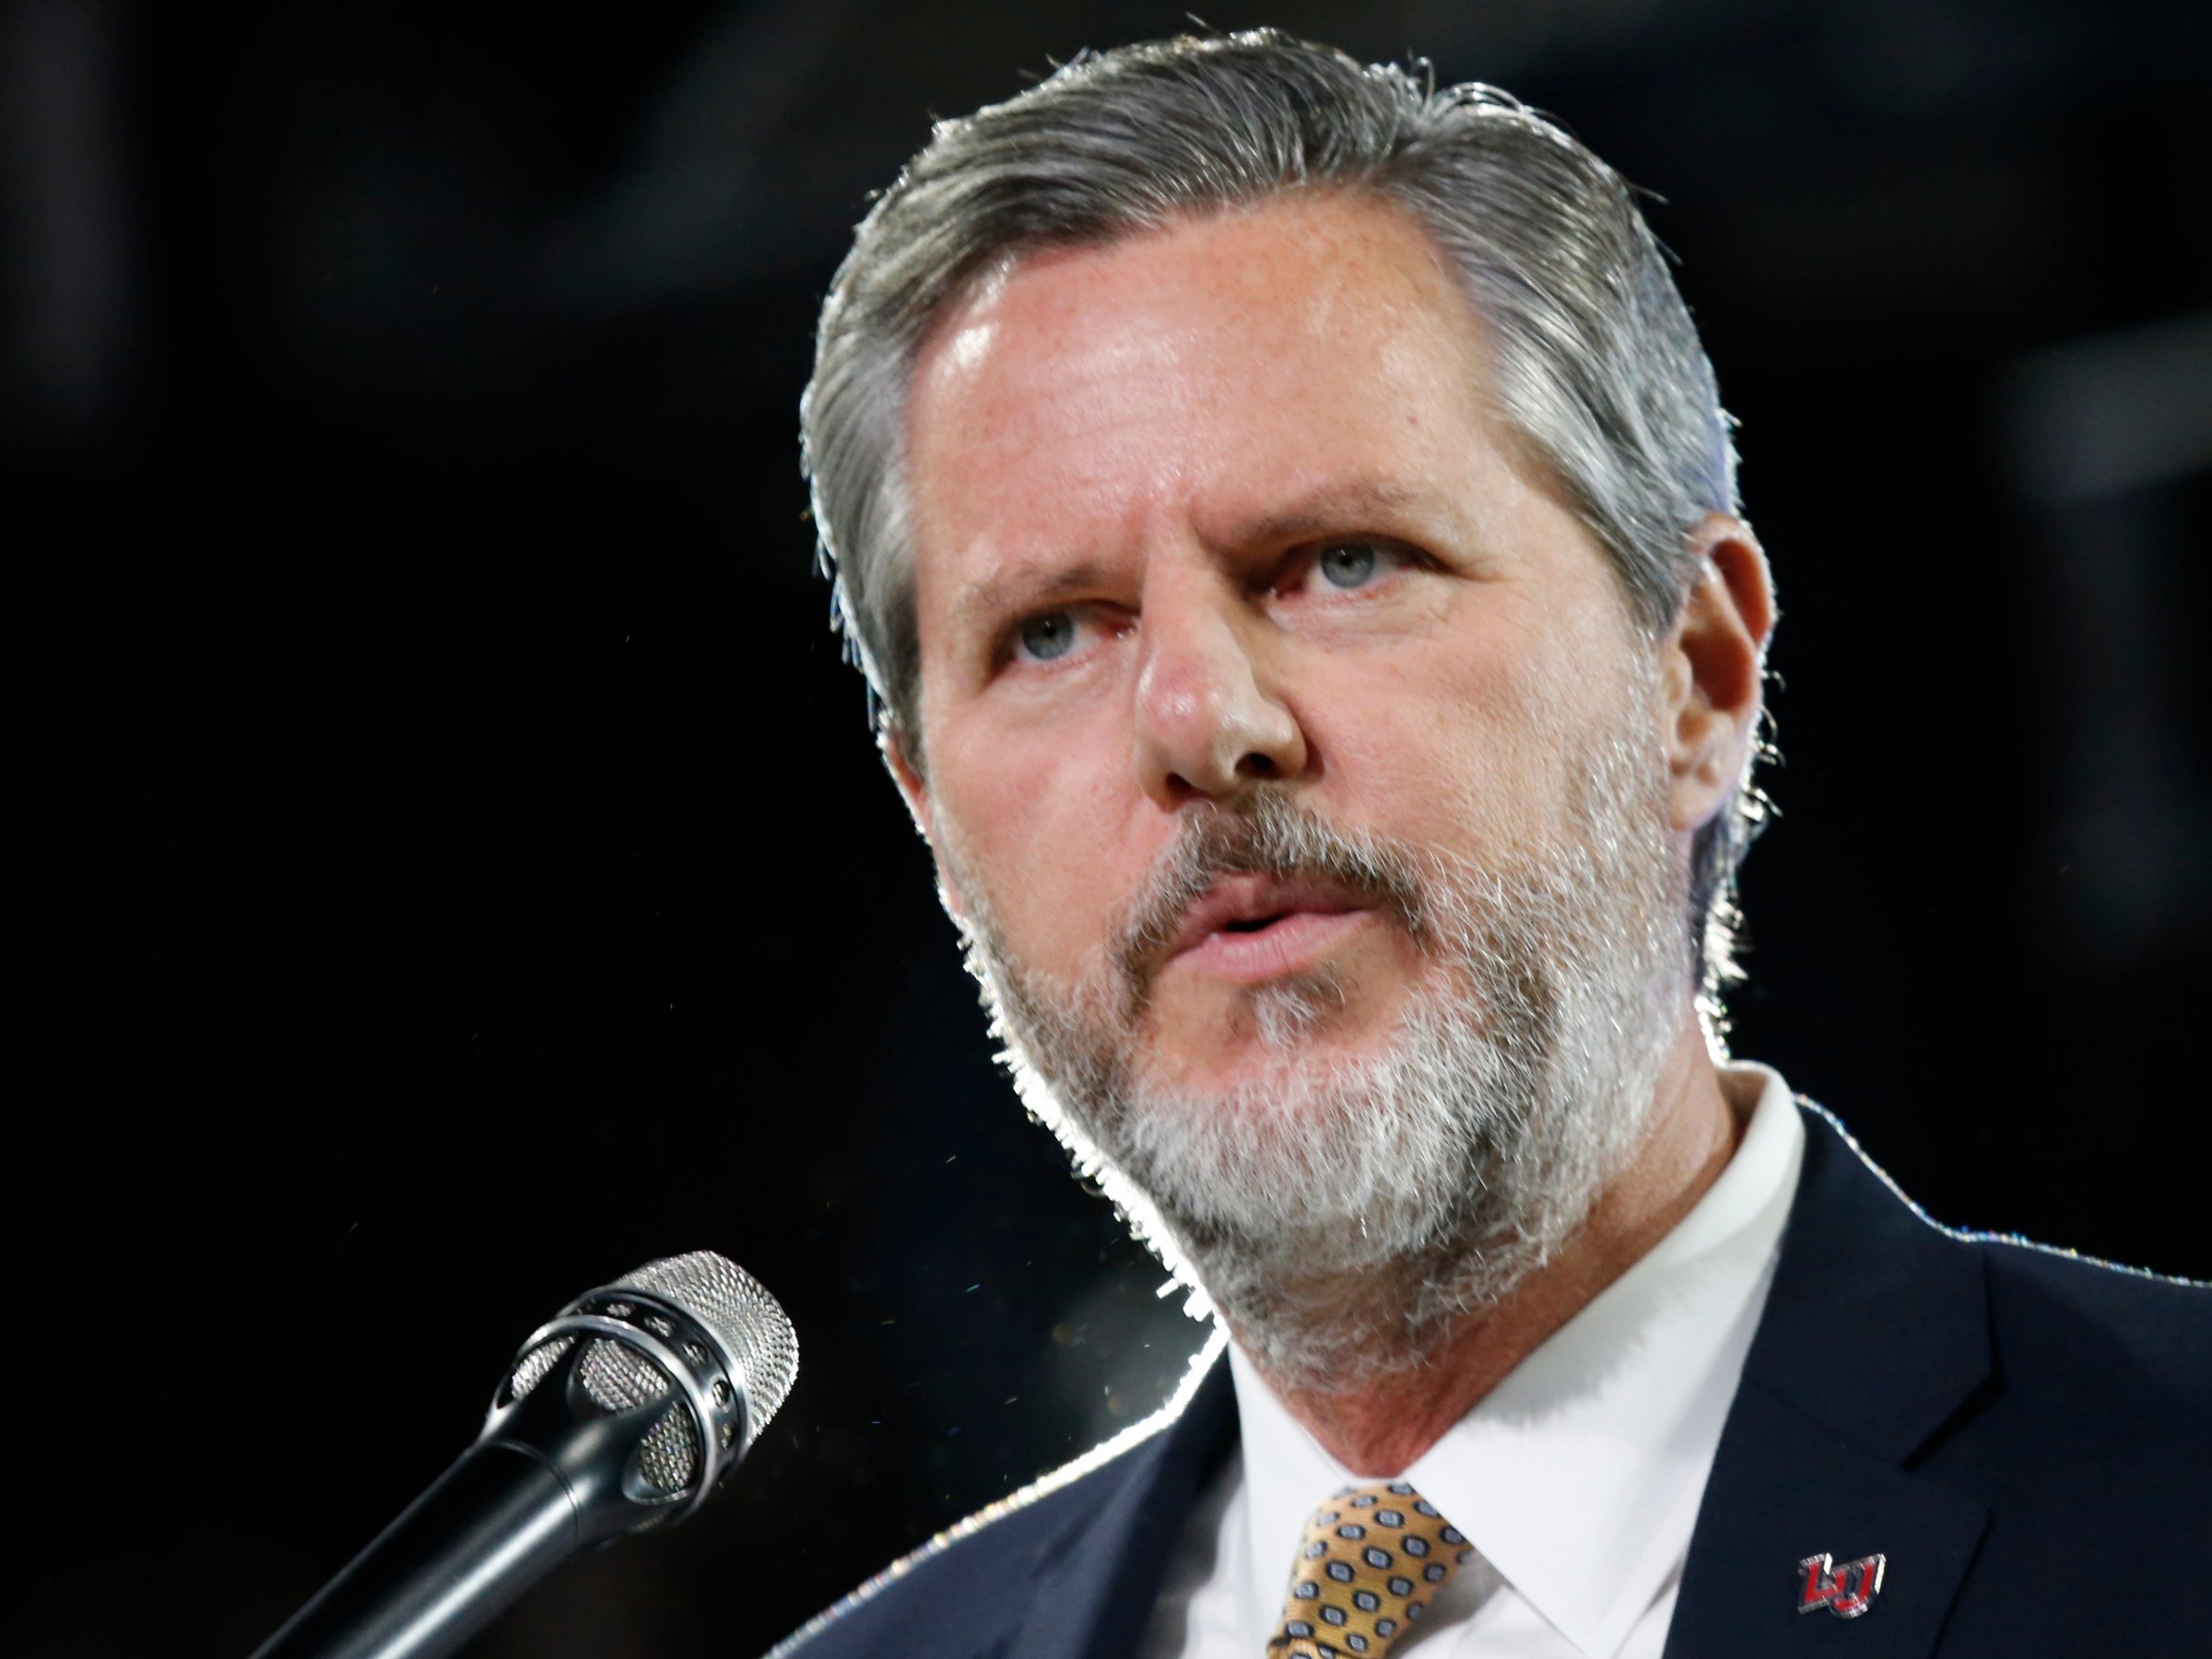 Liberty University president Jerry Falwell, Jr. introduces Republican Vice Presidential candidate, Indiana Gov. Mike Pence at Liberty University in Lynchburg, Va., Wednesday, Oct. 12, 2016. (AP Photo/Steve Helber)